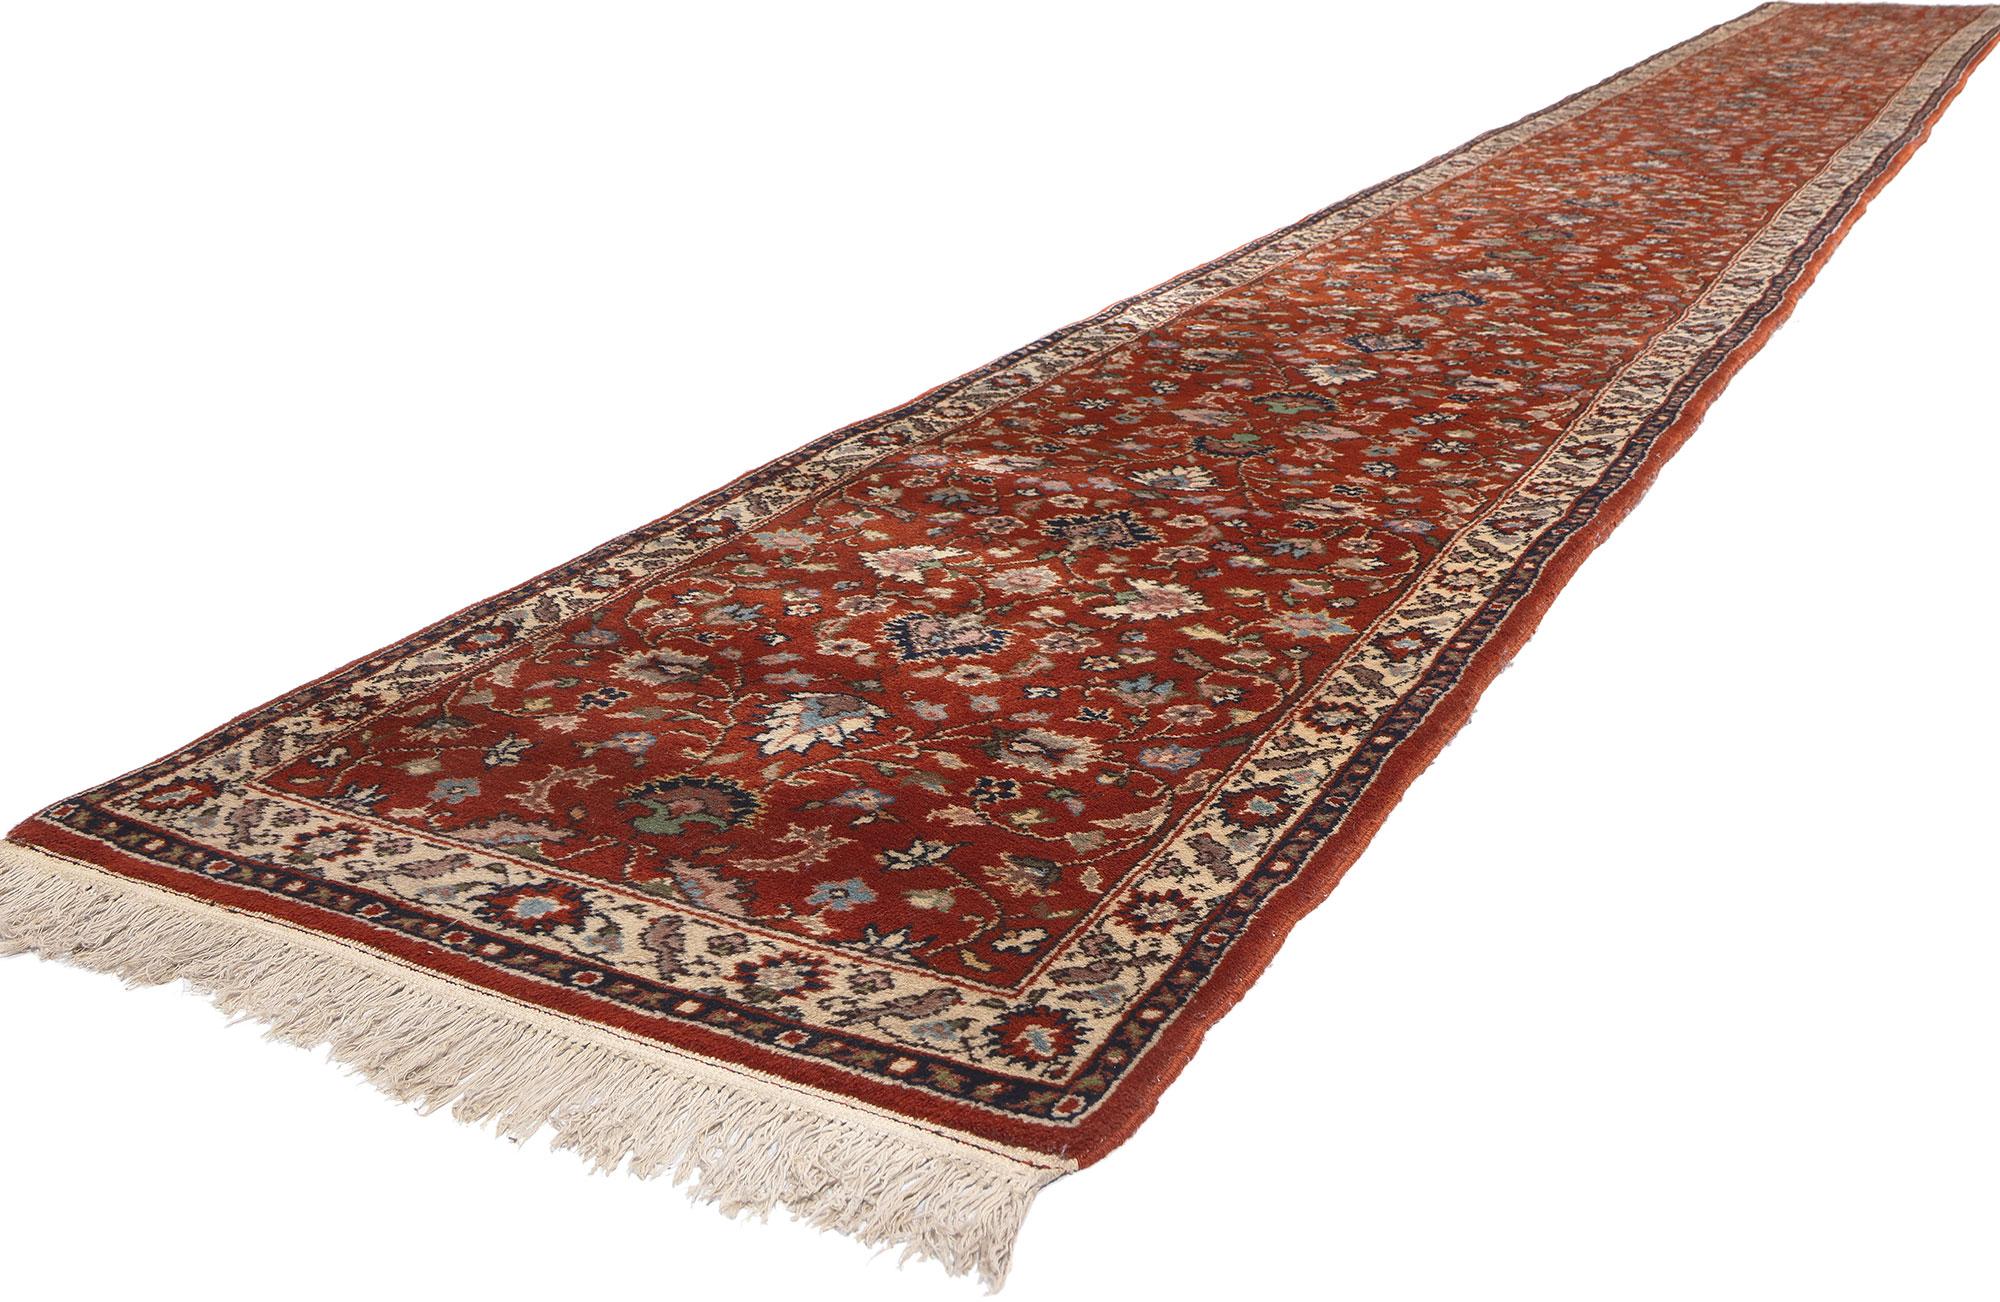 78704 Vintage Romanian Rug Runner, 02'08 x 22'05. Romanian carpet runners typically refer to long, narrow carpets or rugs that are used in hallways, corridors, or staircases to add warmth, style, and color to these spaces. These runners are often